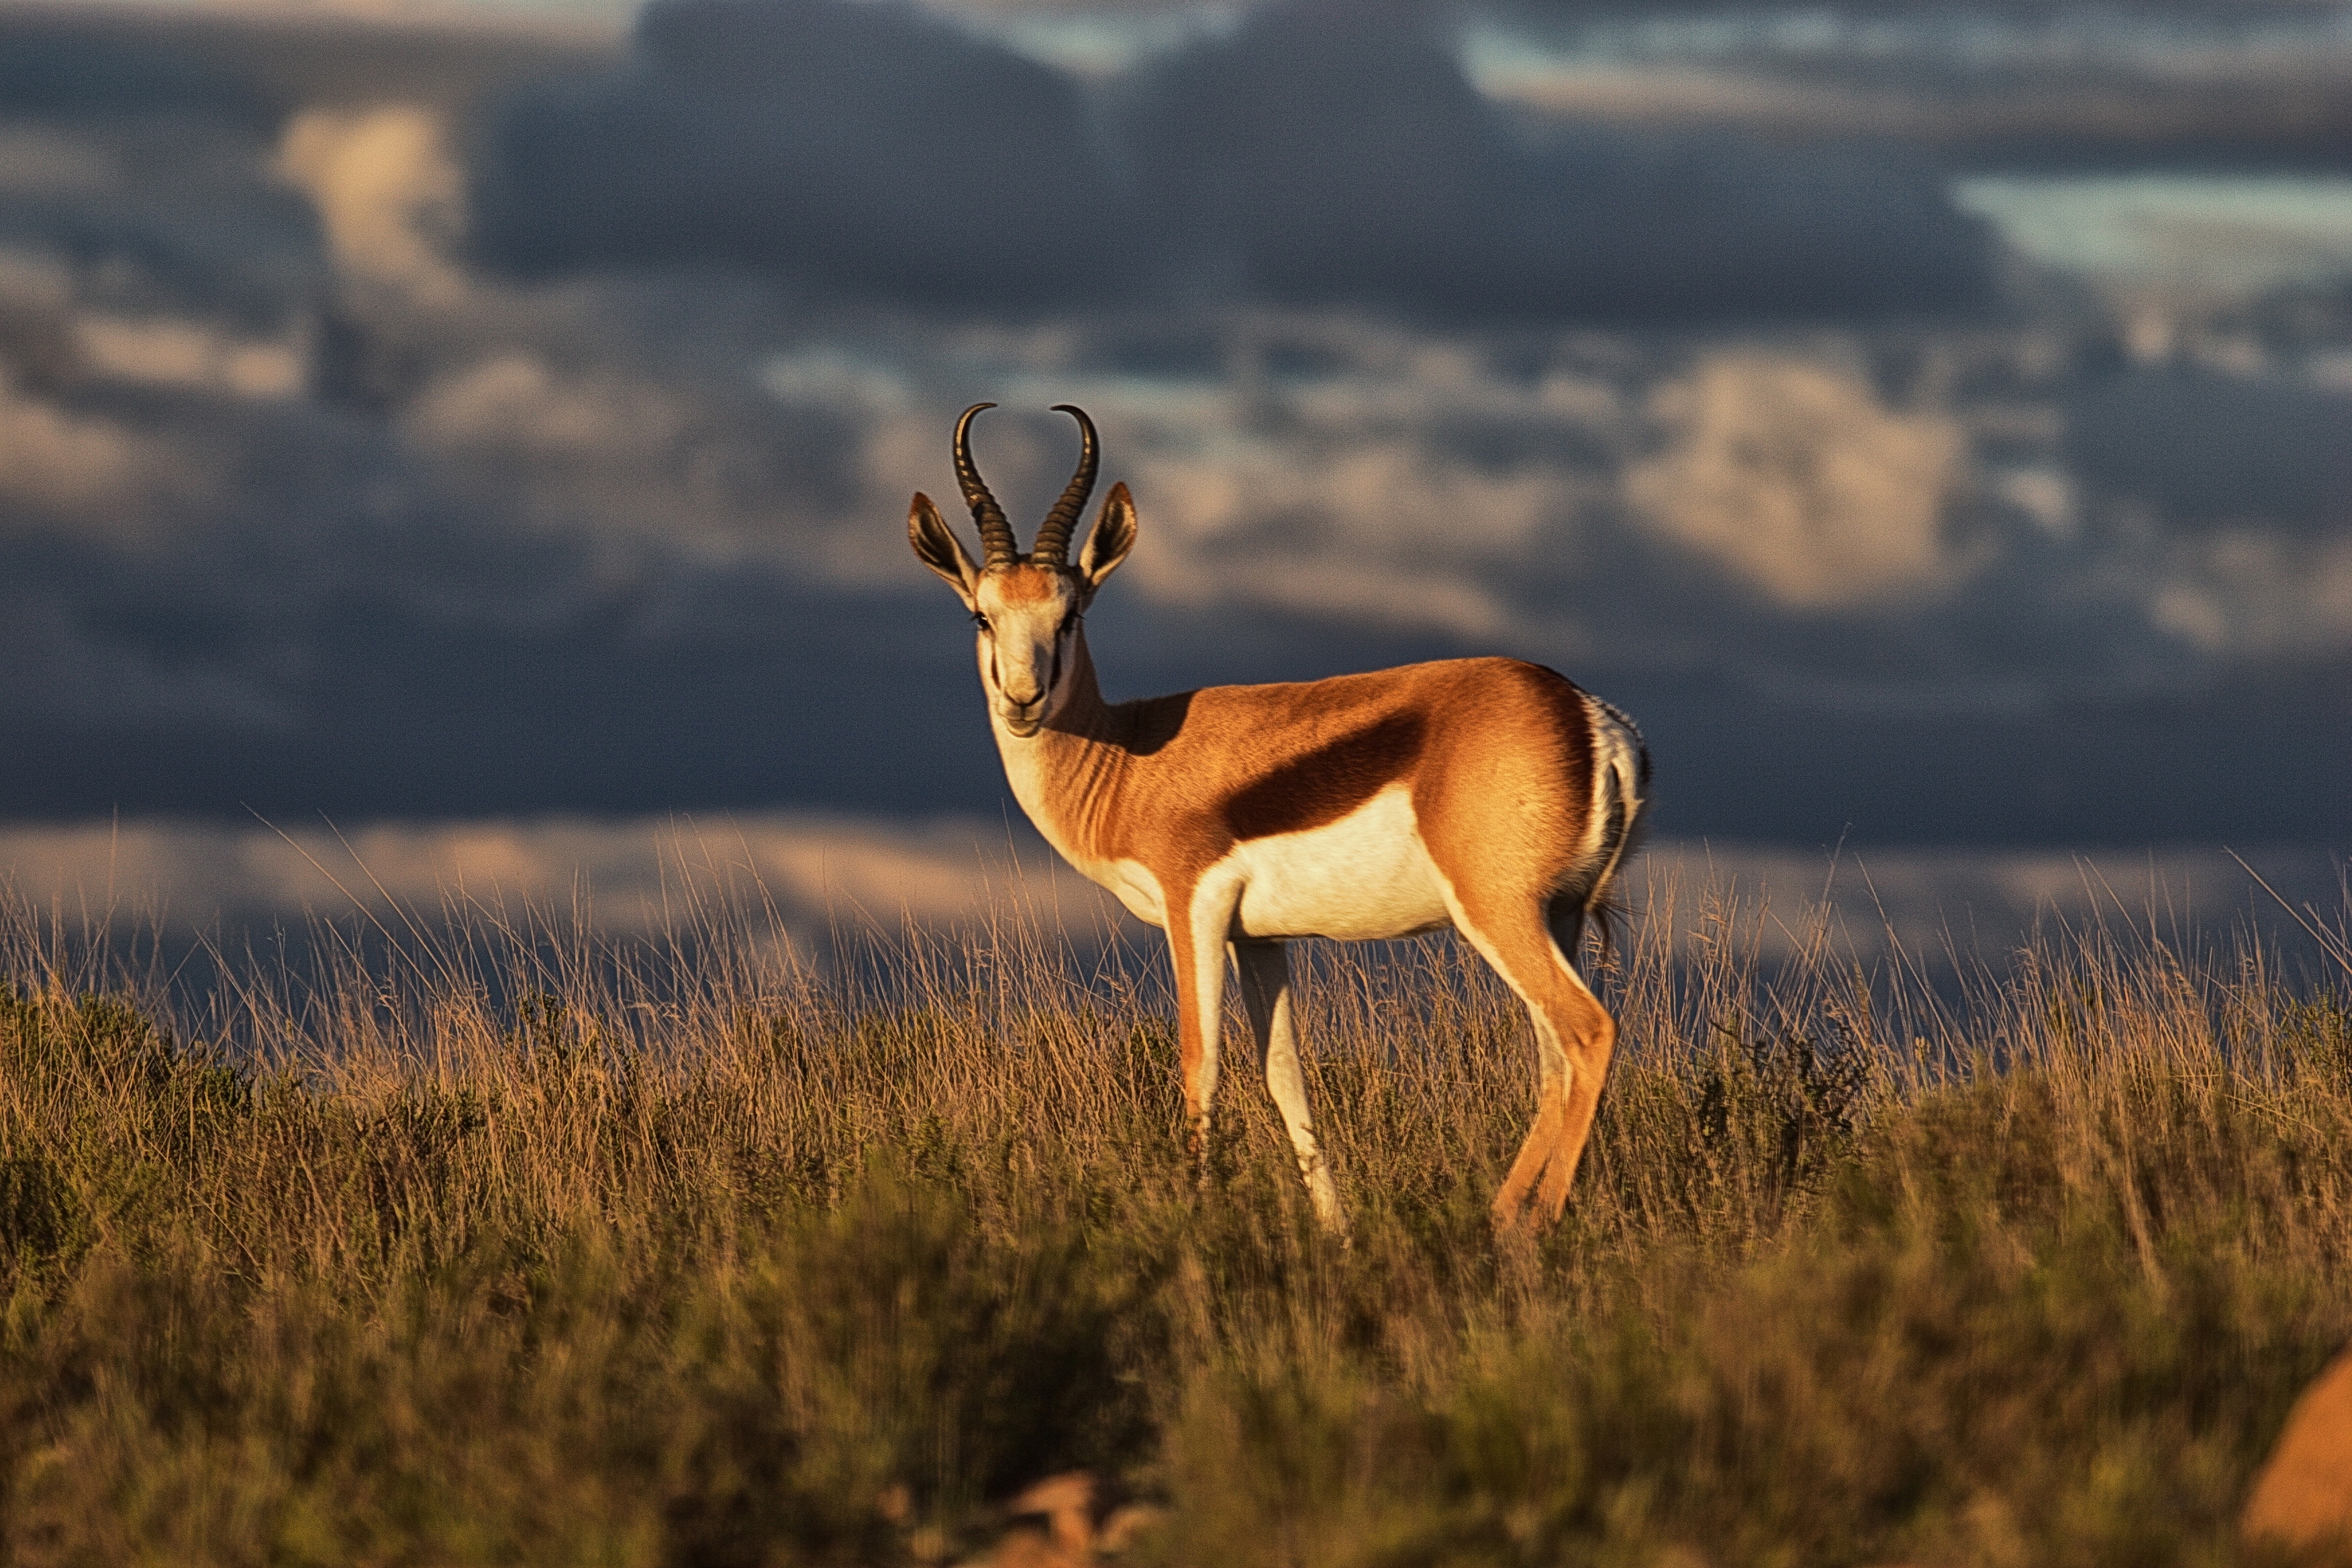 Despite their delicate appearance, these cinnamon-toned, black and white antelope are tough. They thrive in the extreme temperatures of the drylands.